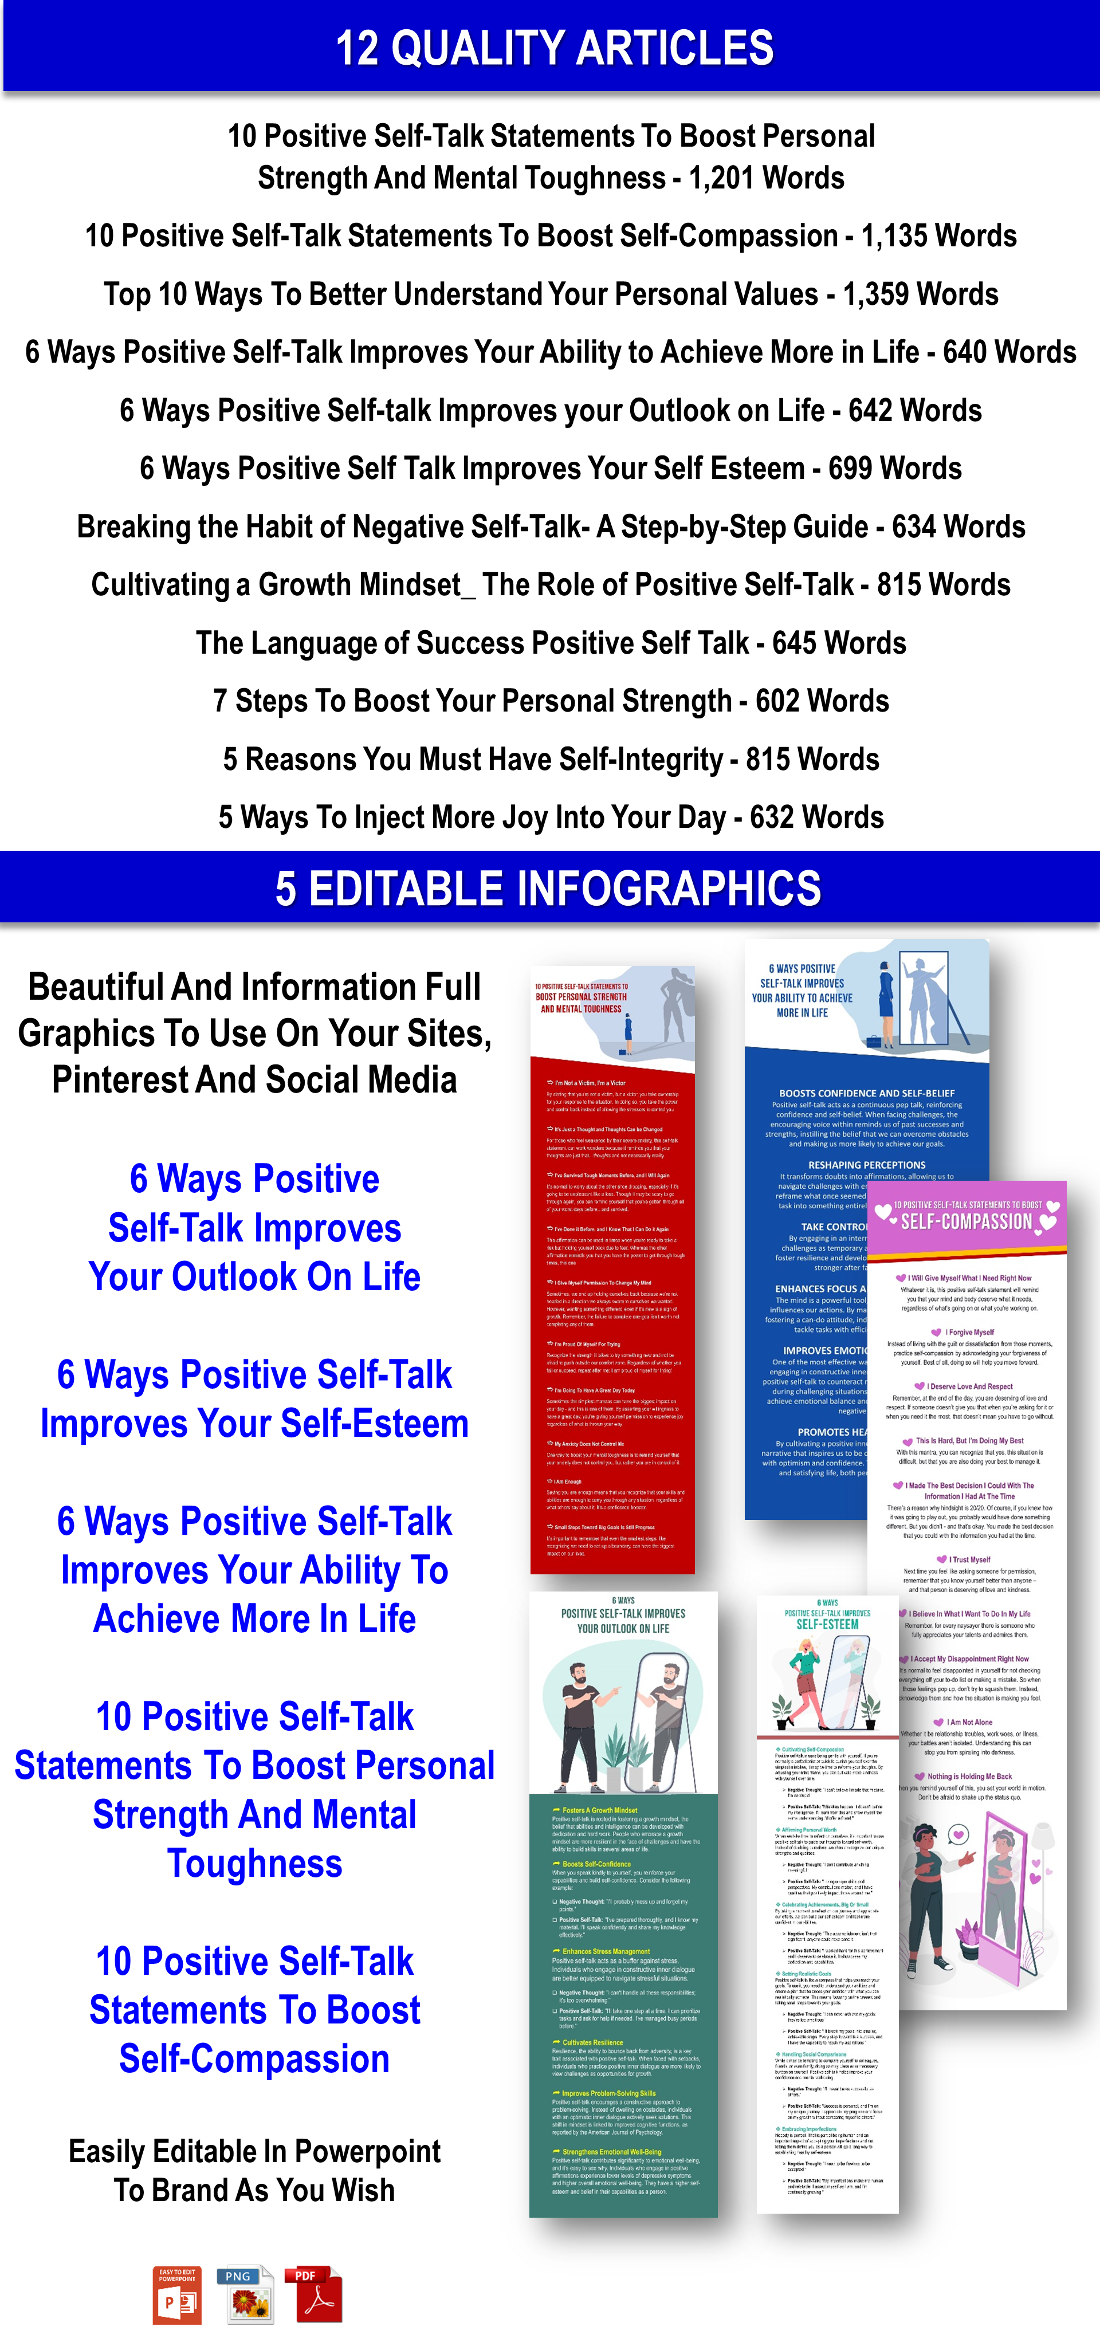 Positive Self-Talk Content Pack with PLR Rights